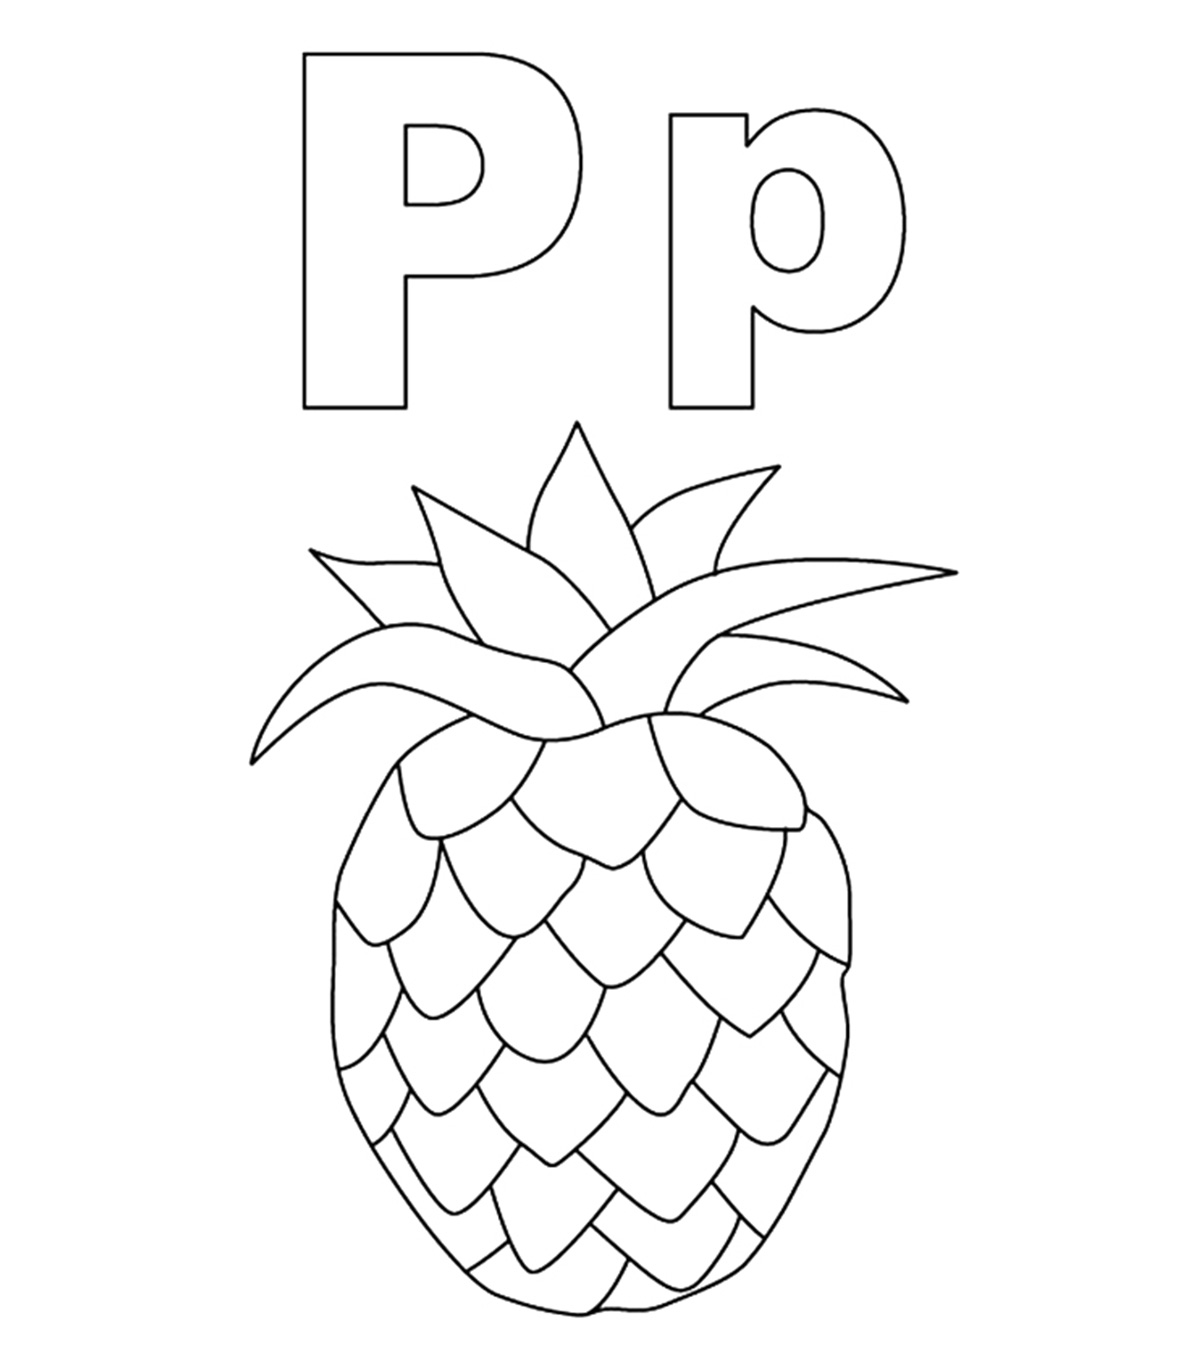 Top 10 Letter ‘P’ Coloring Pages Your Toddler Will Love To Learn & Color